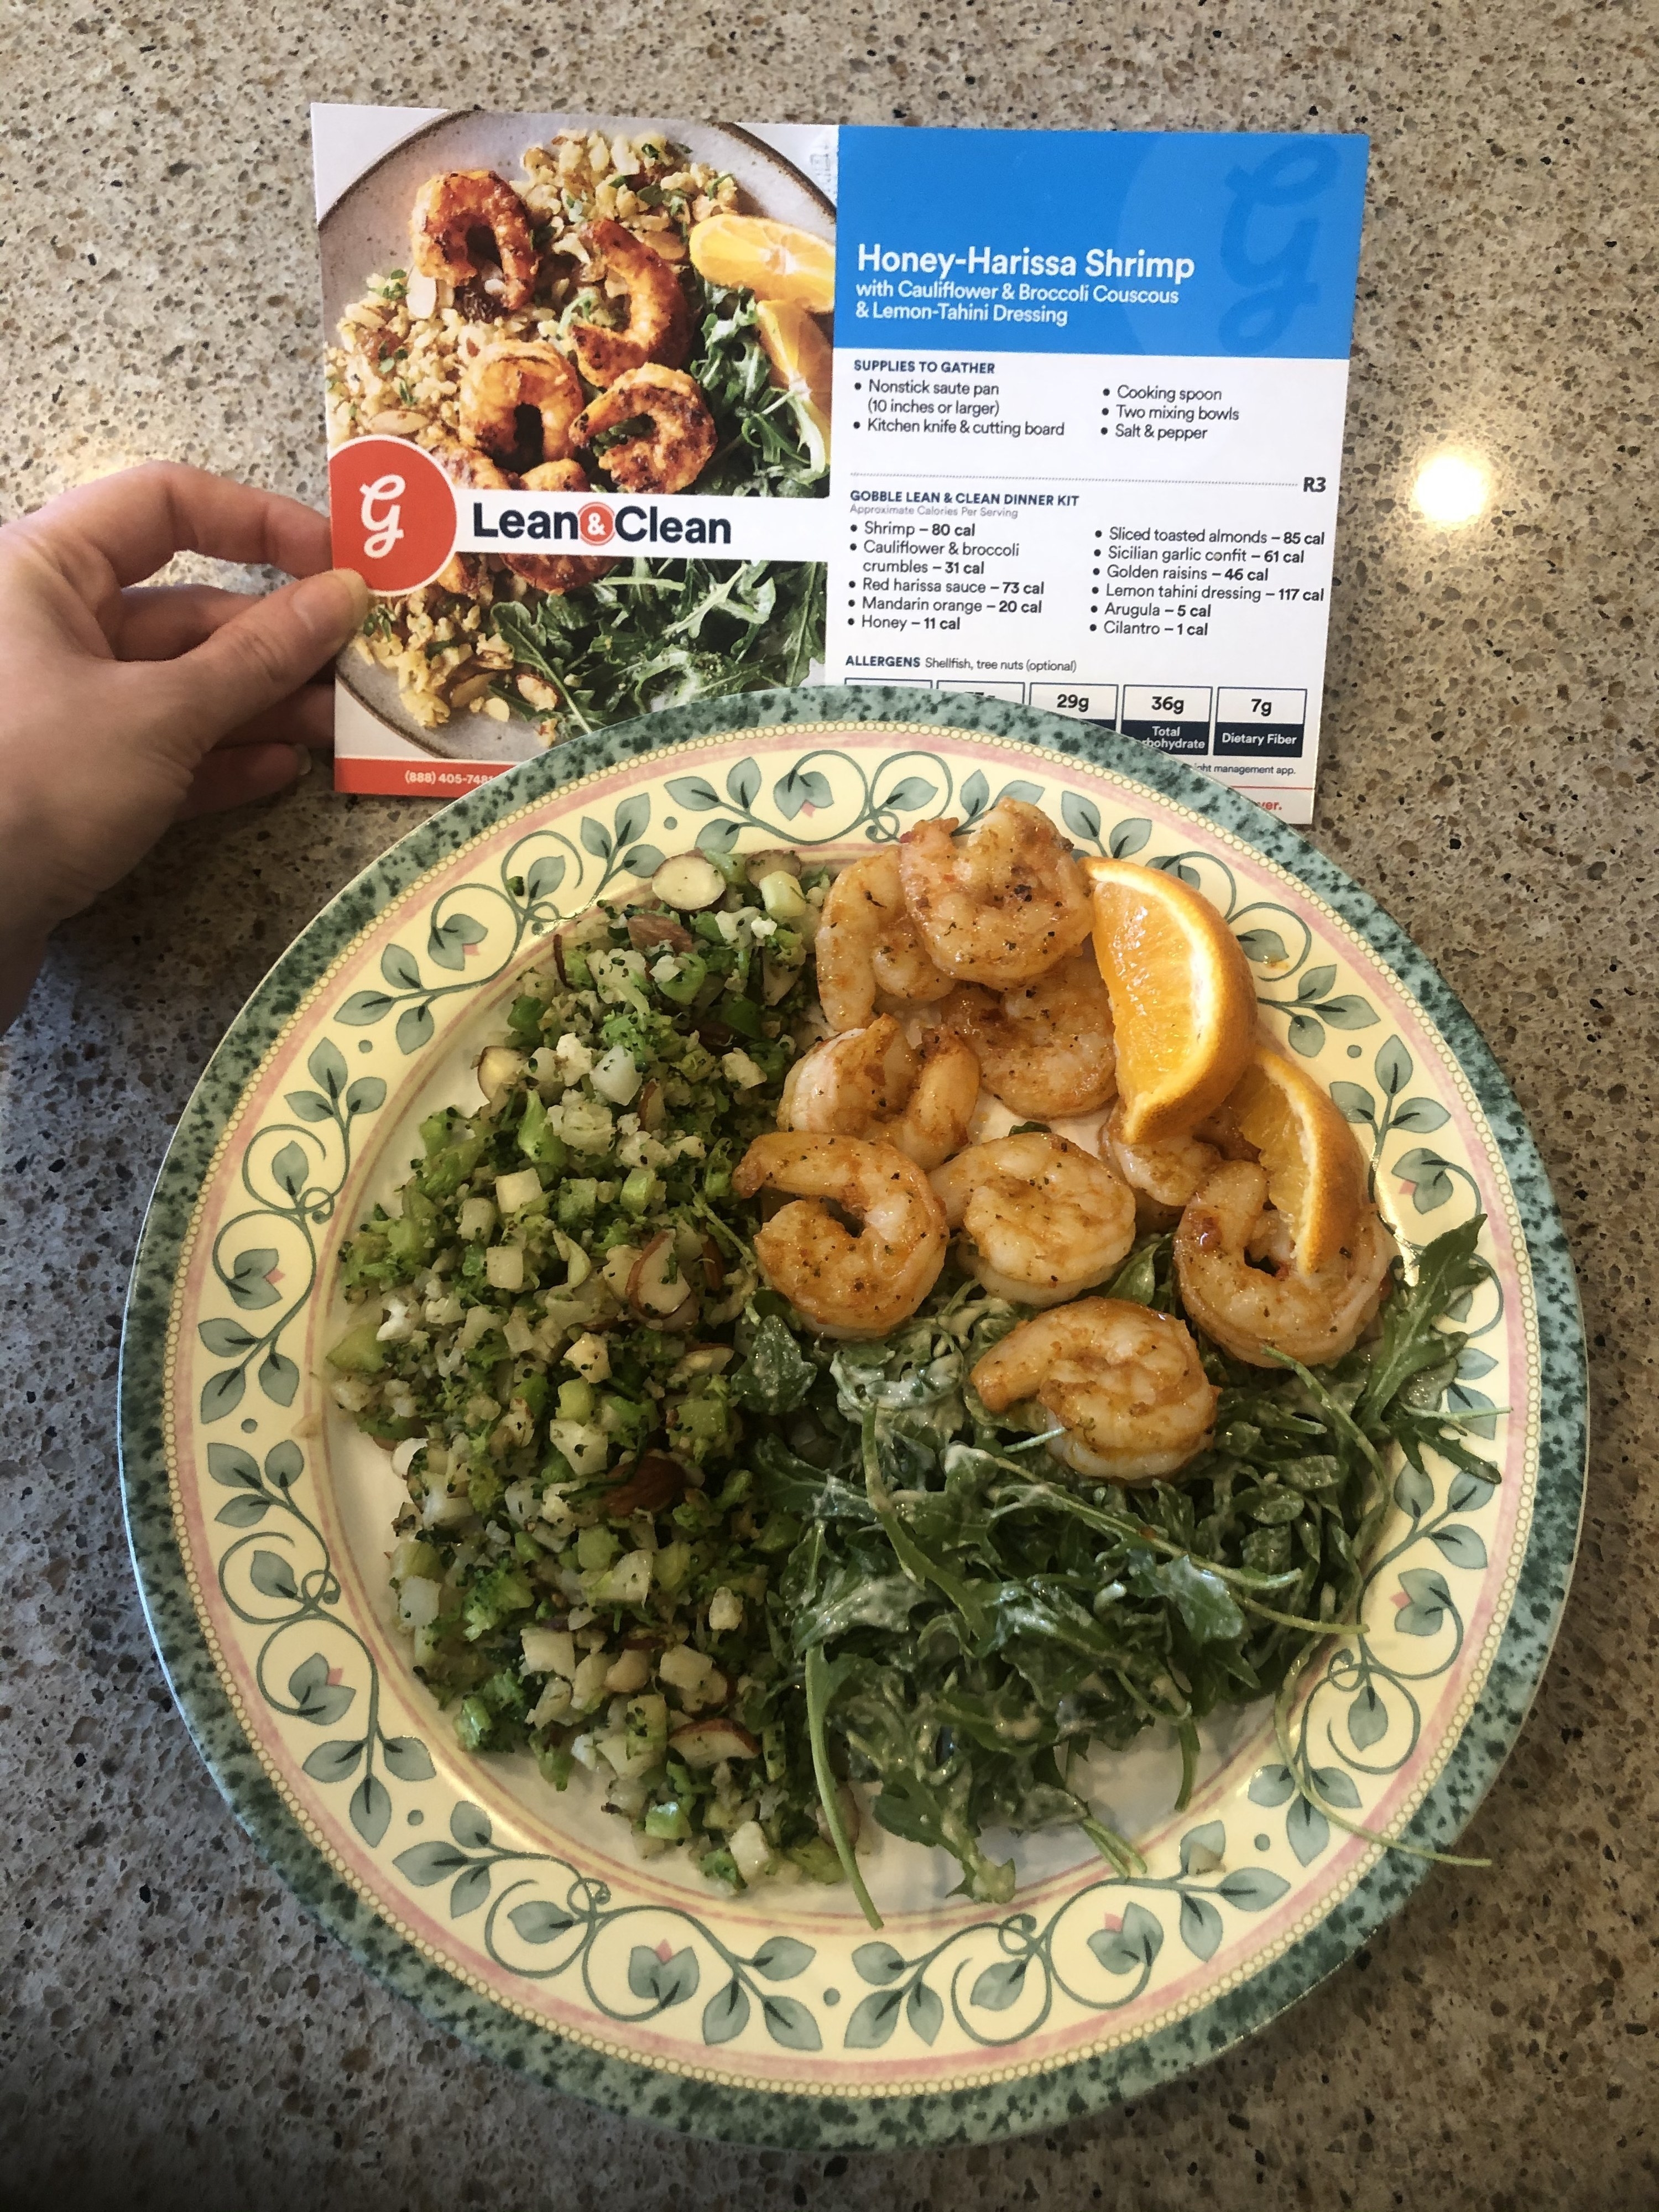 A meal kit recipe and recipe card.